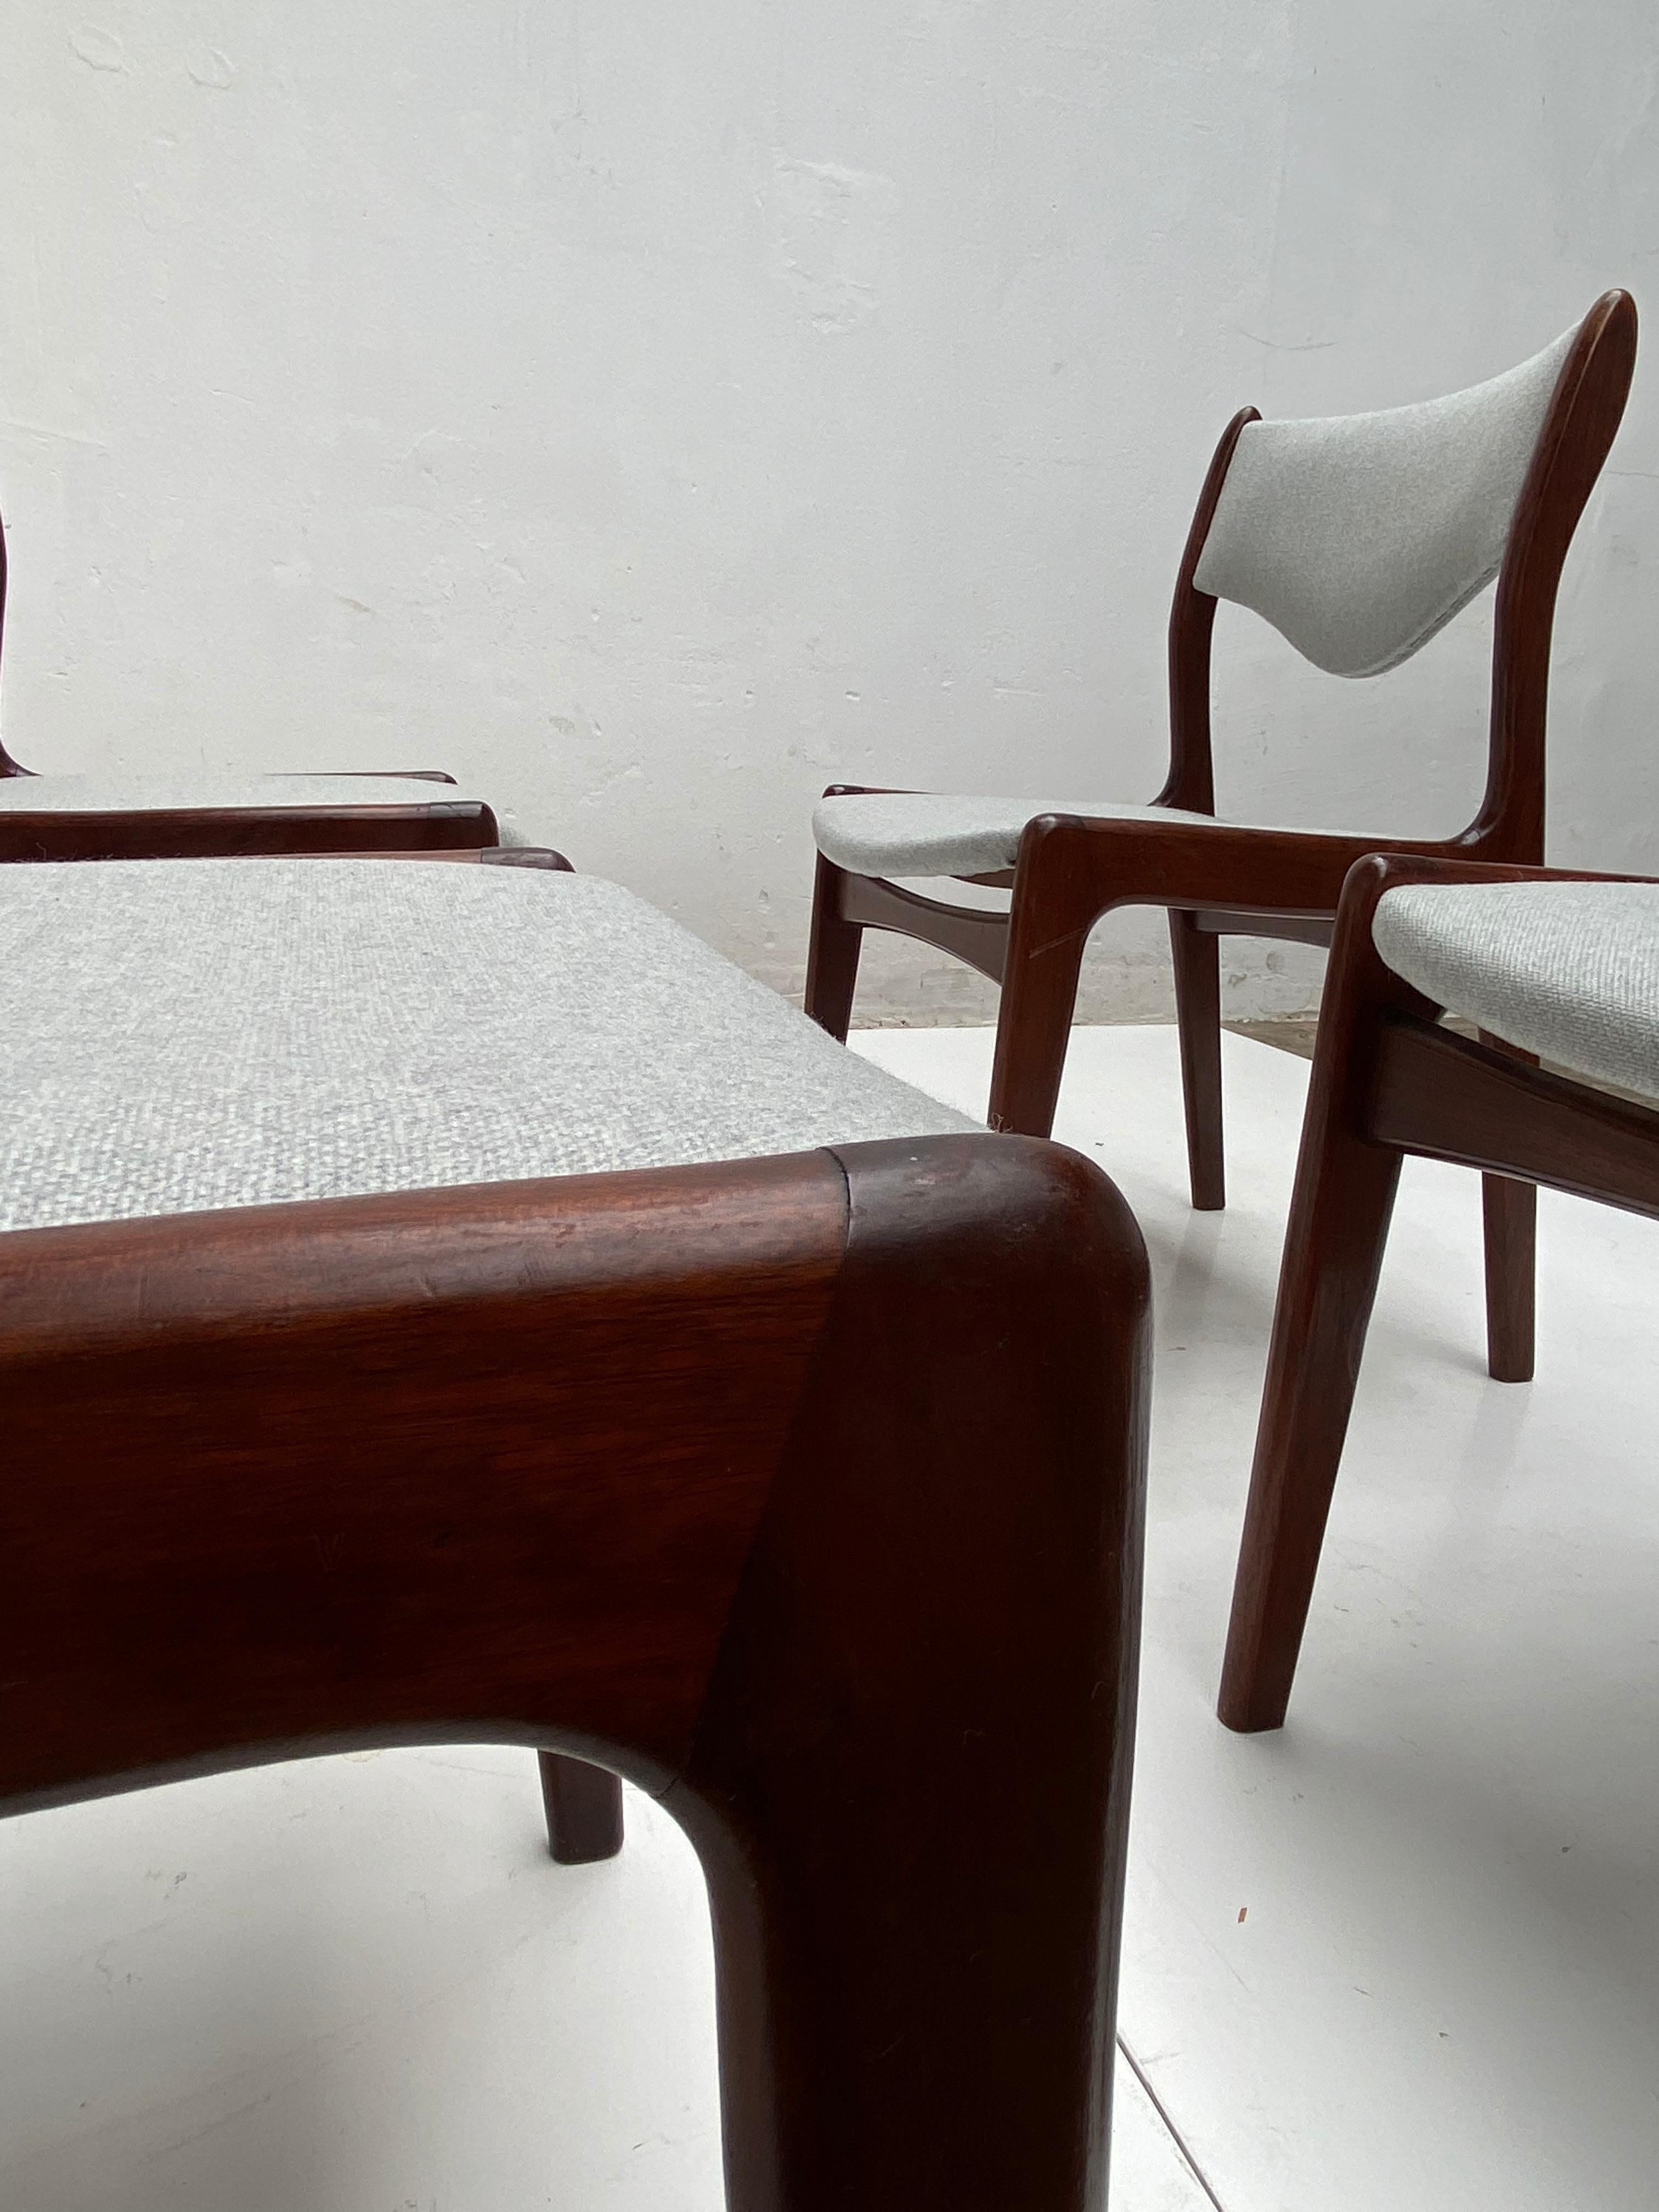 Mid-20th Century Johannes Andersen Set of 4 Solid Teak Dining Chairs produced by Mahjongg, 1960's For Sale